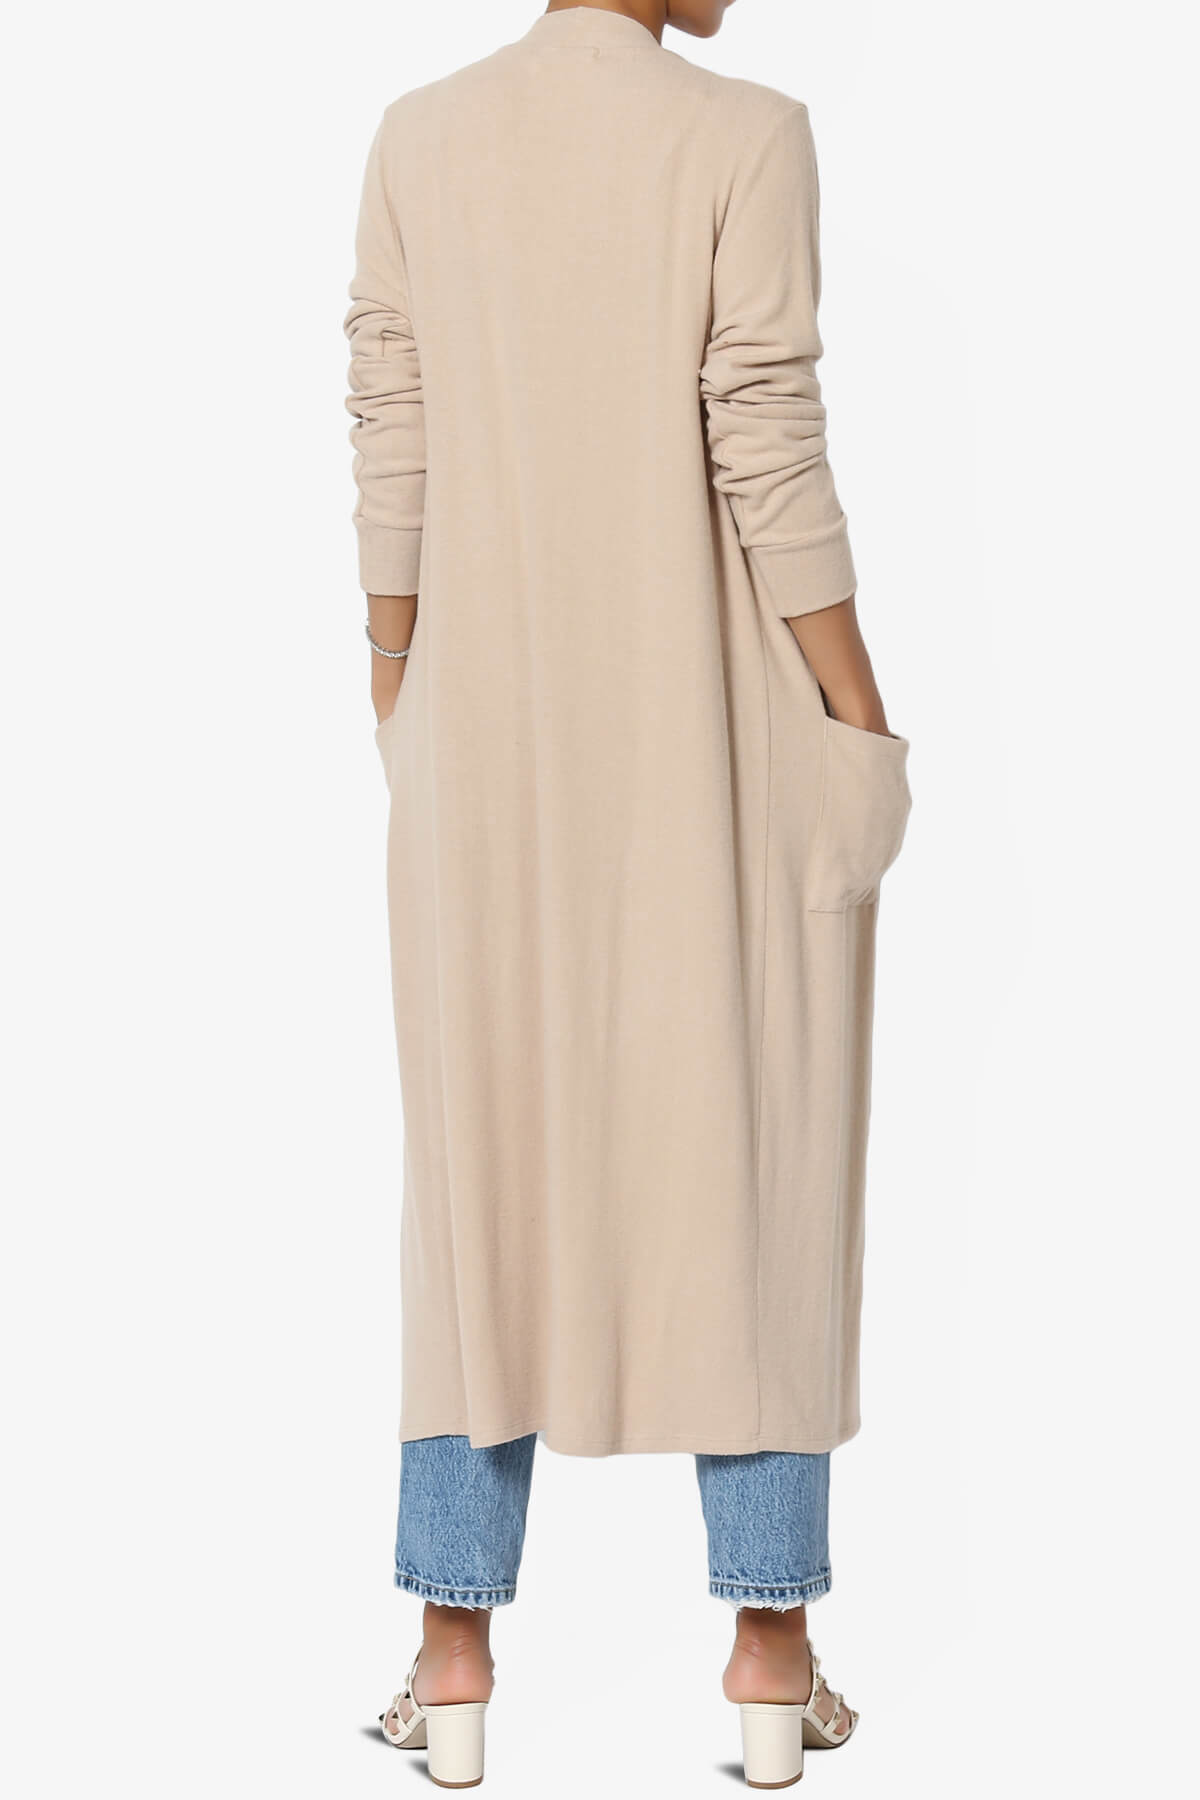 Noelle Extra Long Duster Knit Cardigan SAND_2